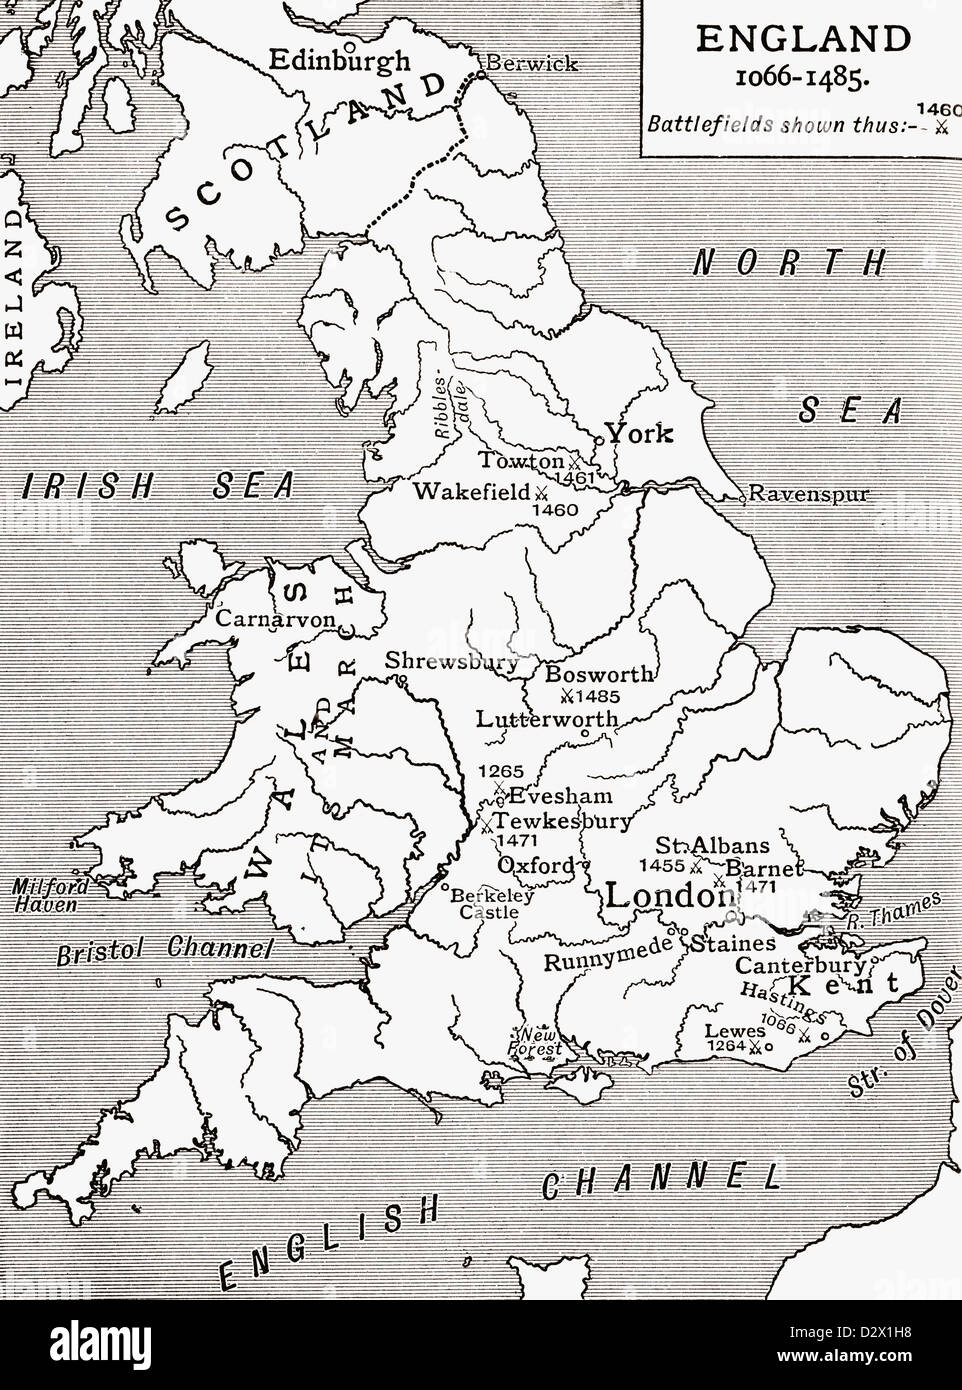 A map of England 1066 - 1485, battlefields marked with crossed swords. From A First Book of British History published 1925. Stock Photo